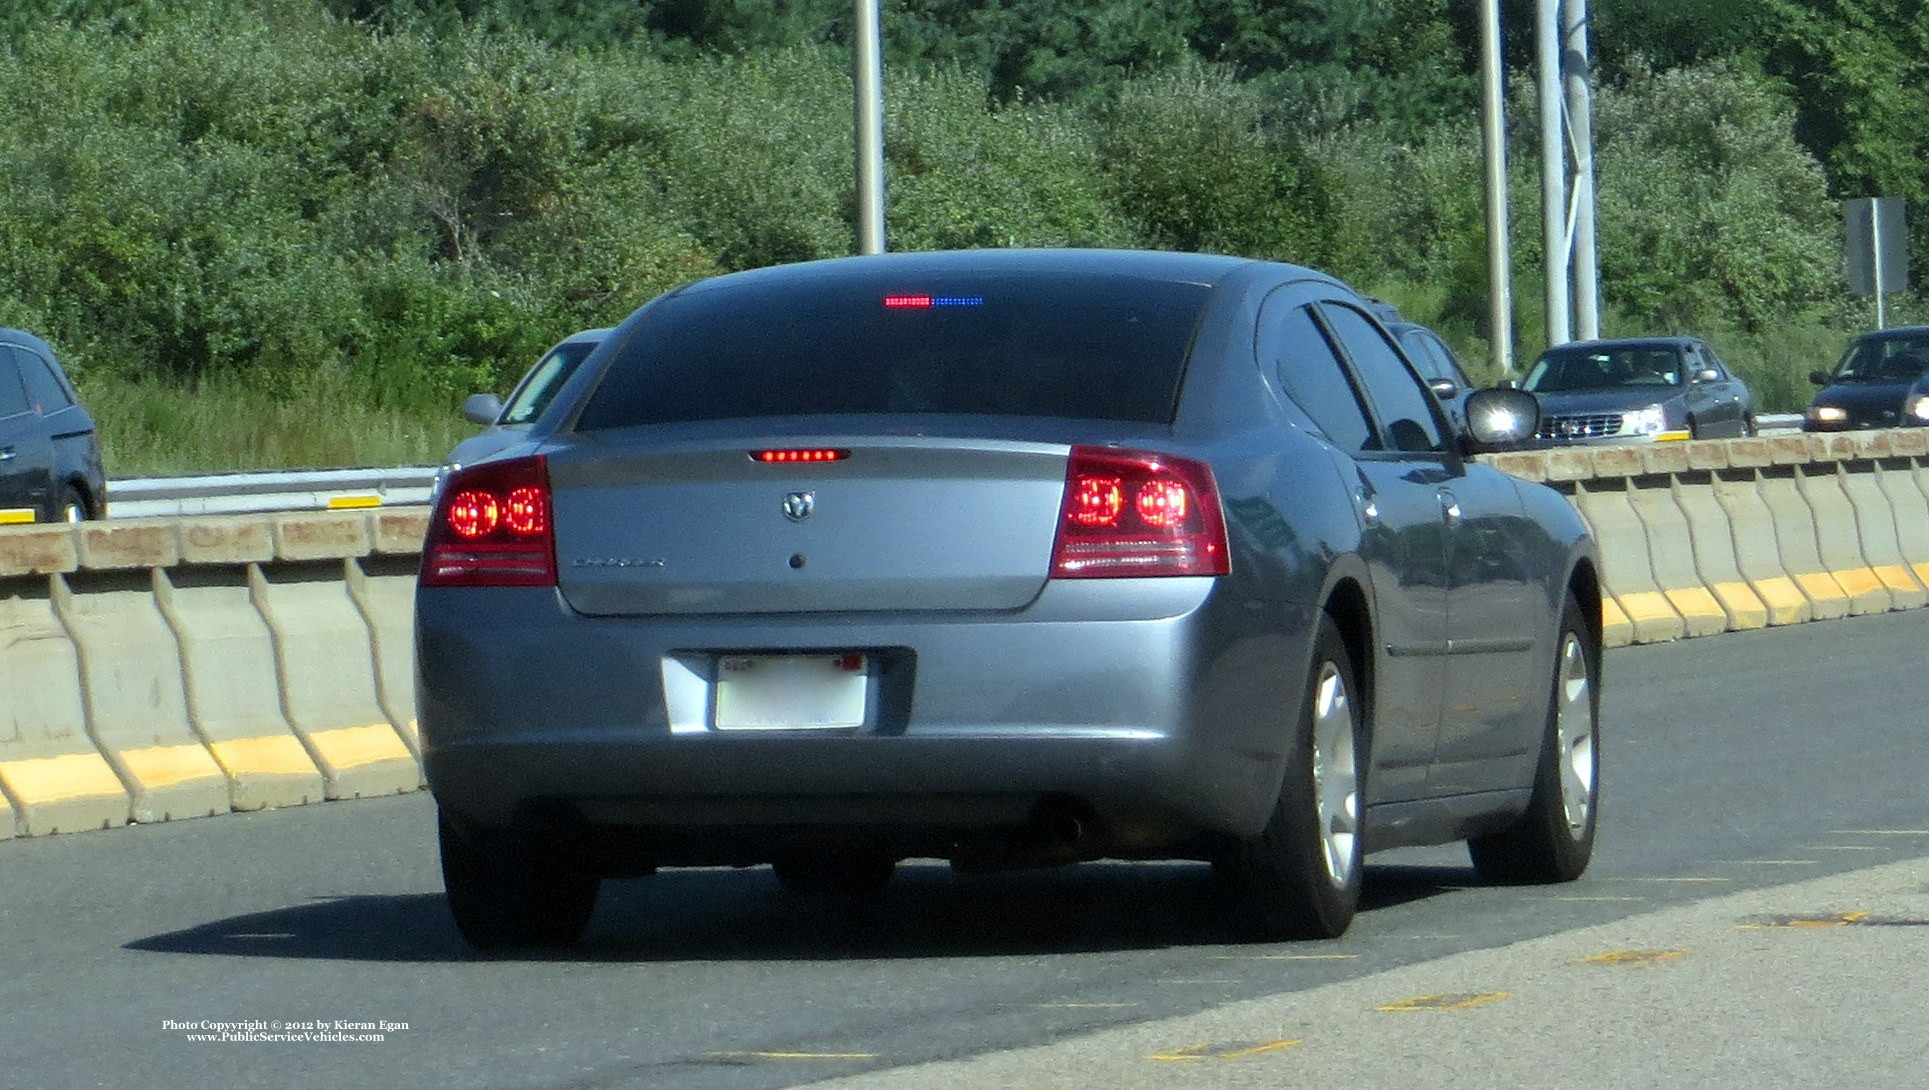 A photo  of Massachusetts State Police
            Unmarked Unit, a 2006-2010 Dodge Charger             taken by Kieran Egan